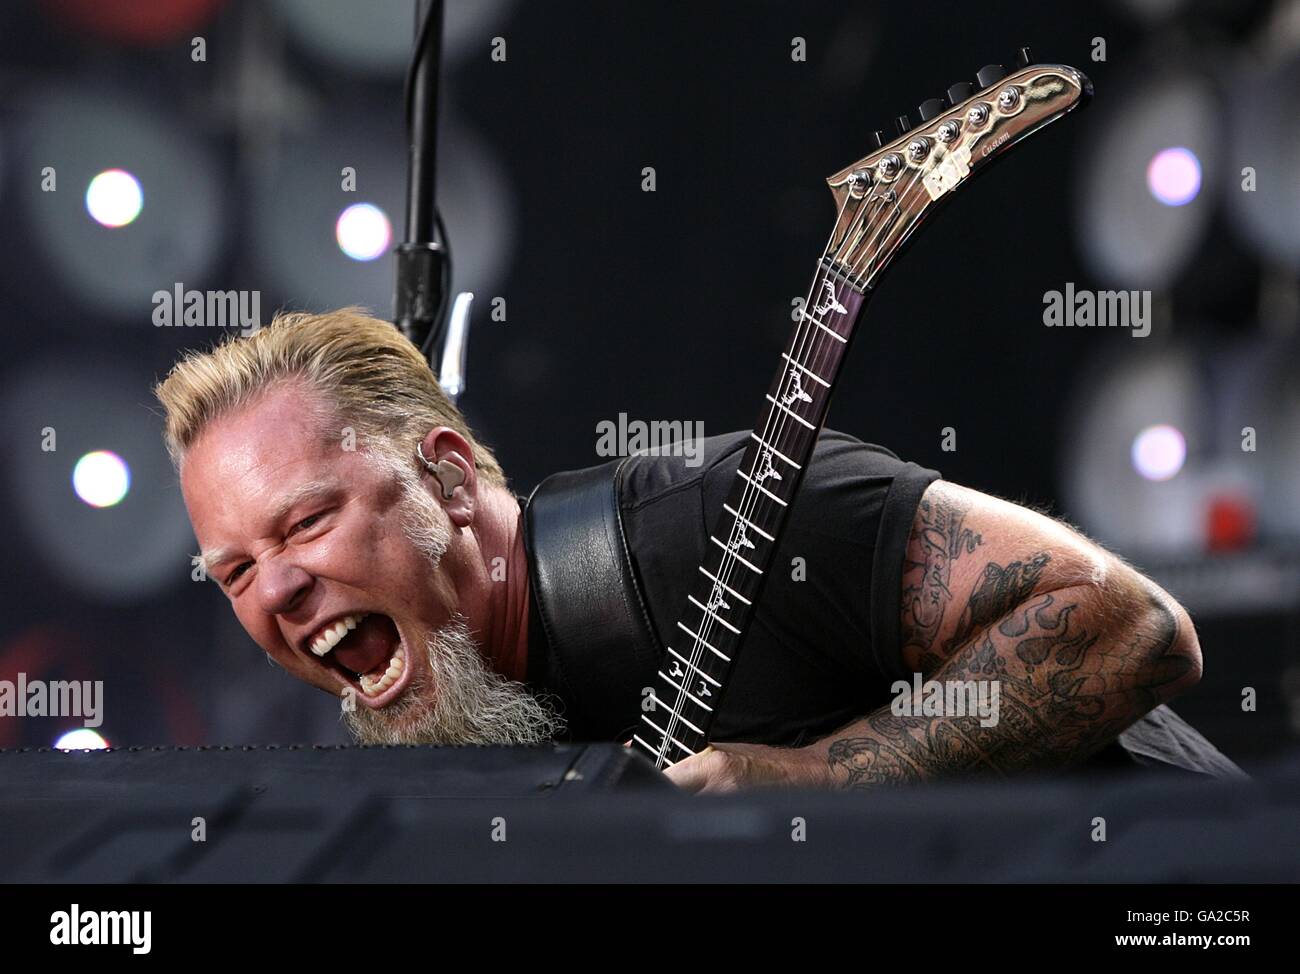 James Hetfield on stage during Metallica's performance at the charity concert at Wembley Stadium, London. Stock Photo